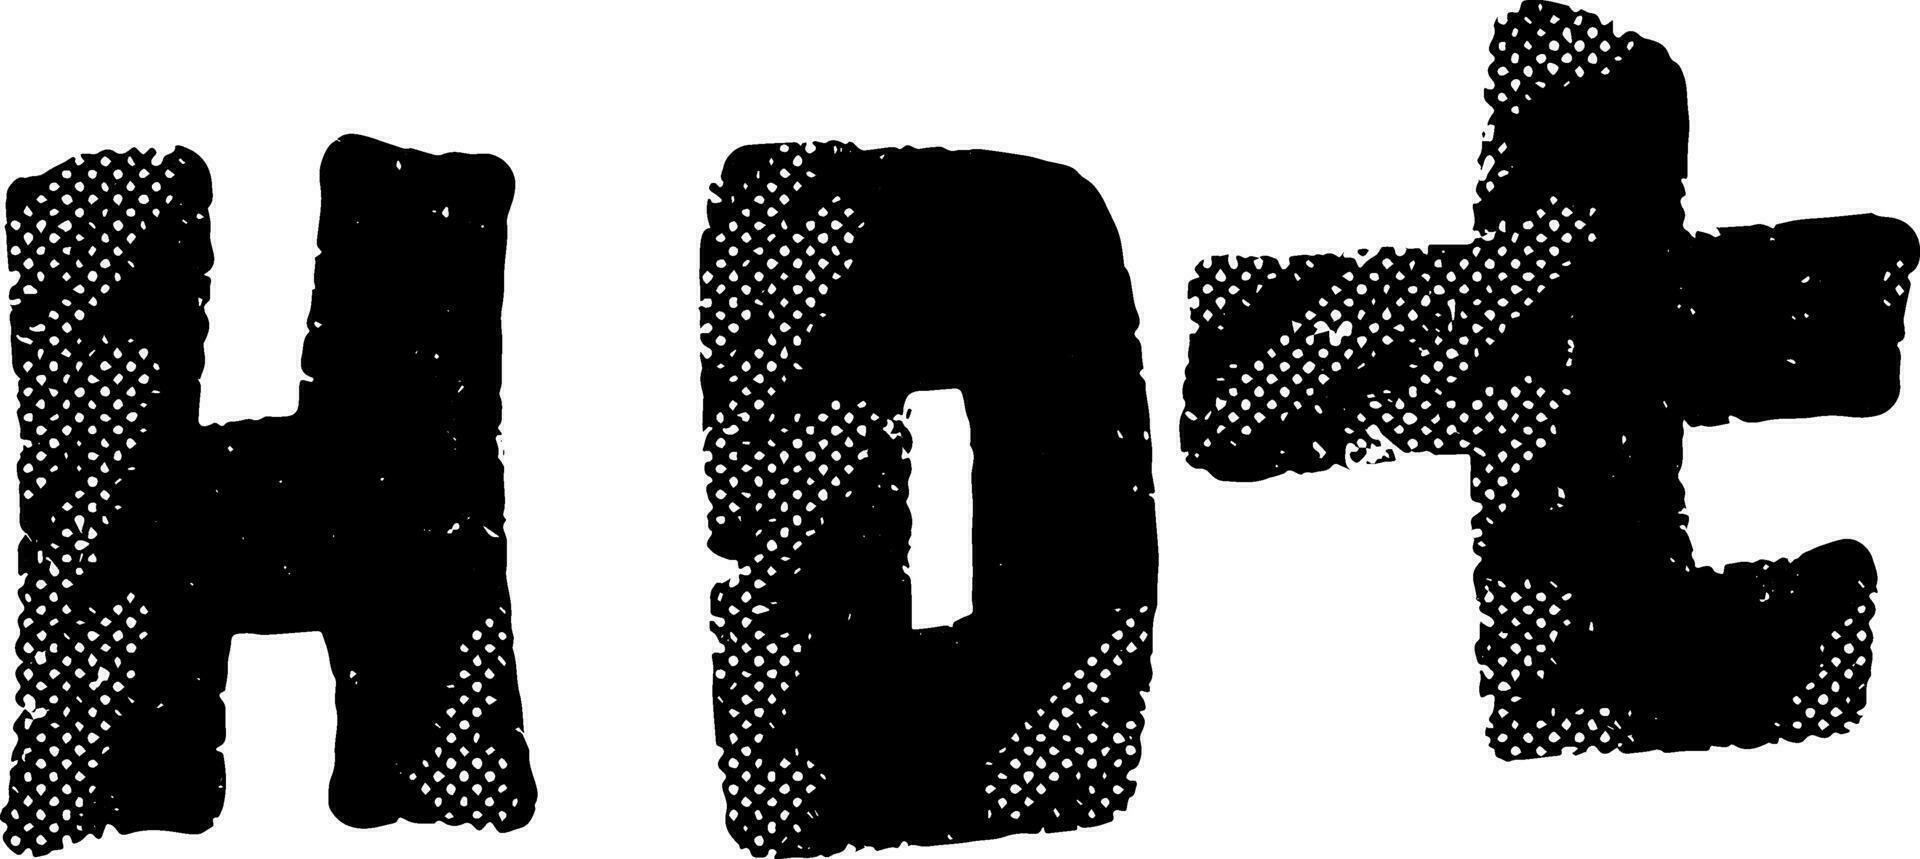 the word hd is written in black and white vector